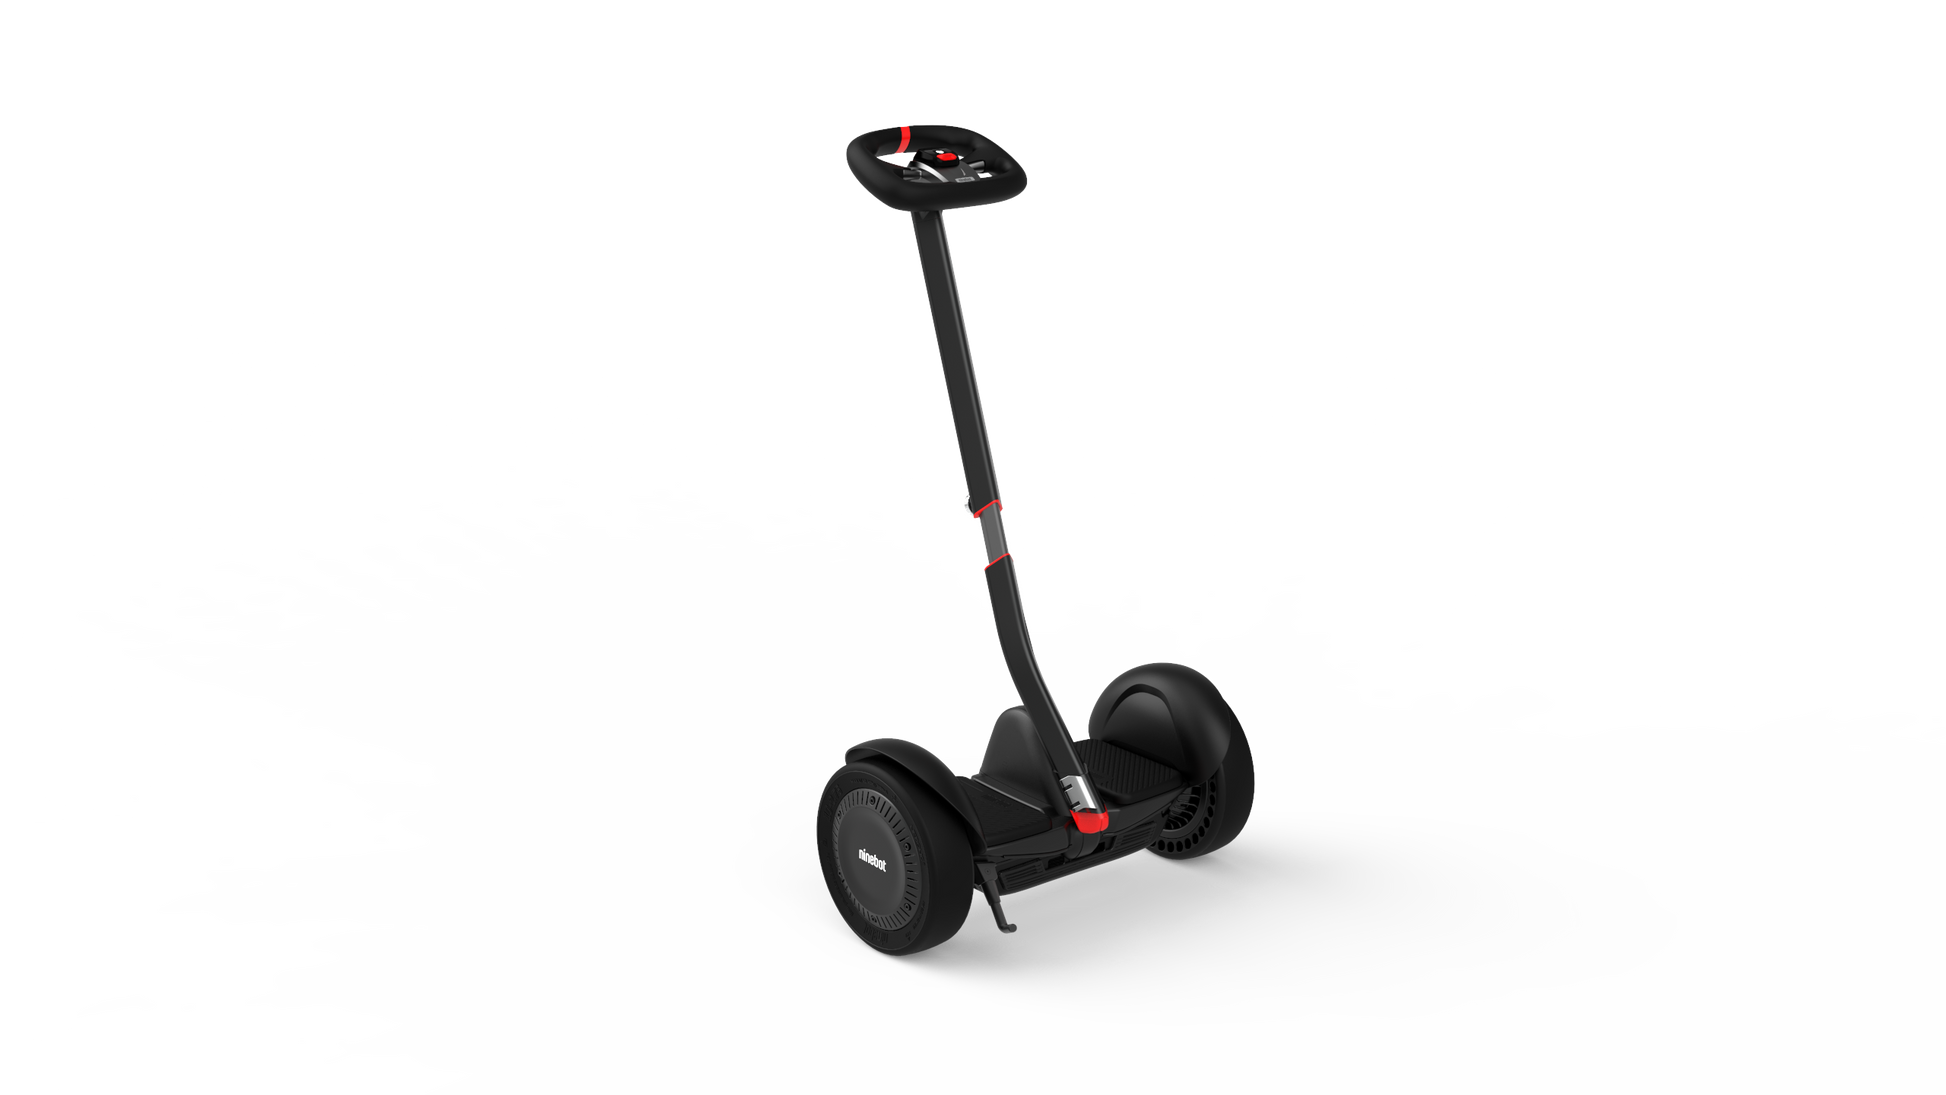 Segway - Ninebot by Segway - Segway Ninebot S - White - Hoverboard